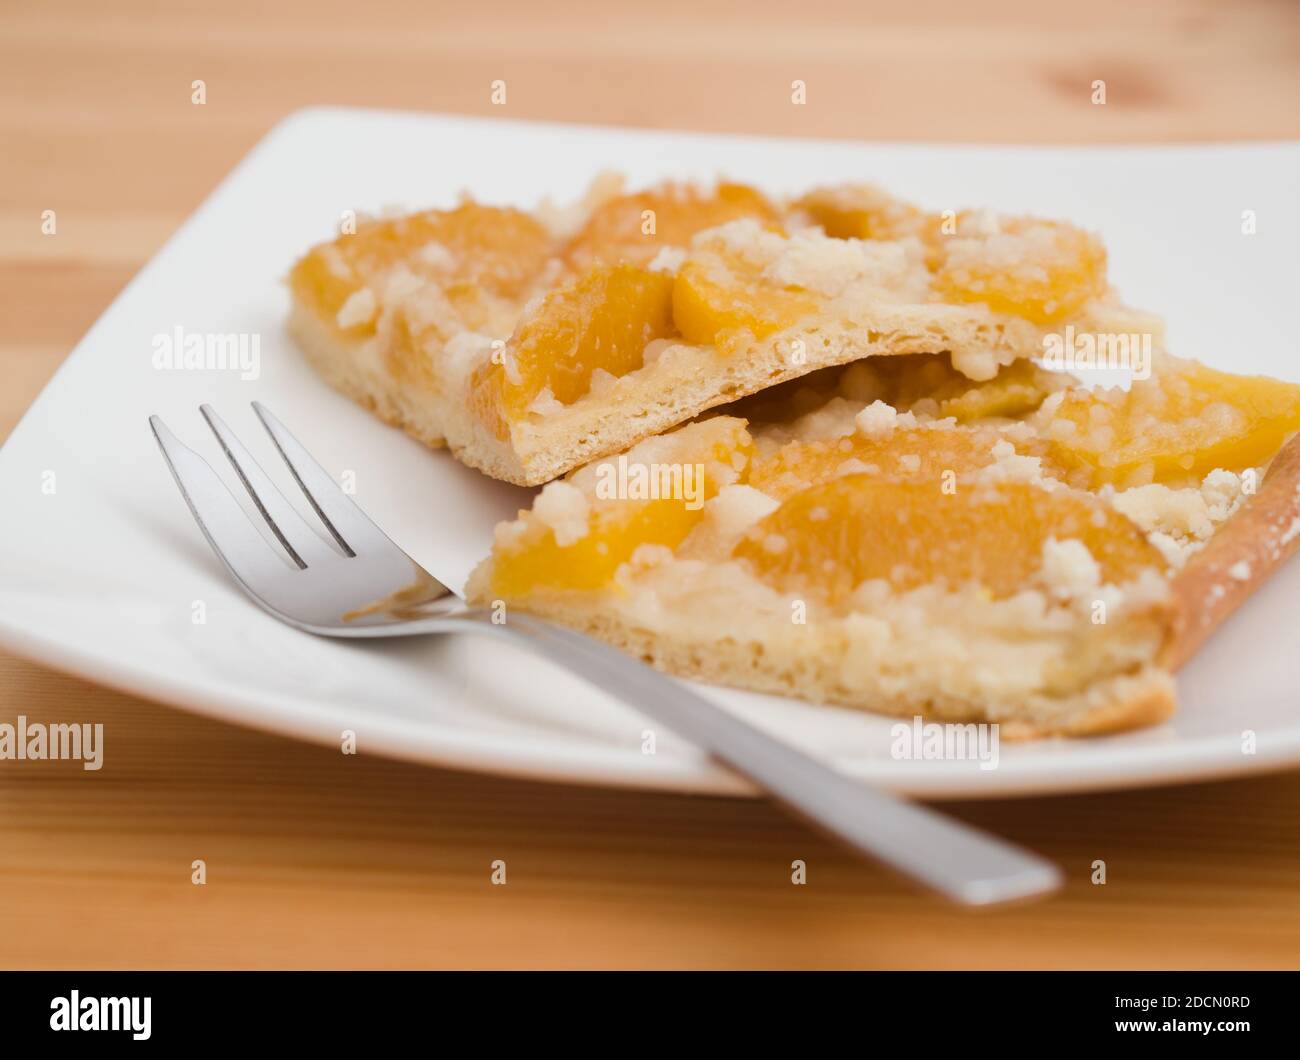 Delicious Peach Pie with Cottage Cheese Closeup Stock Photo